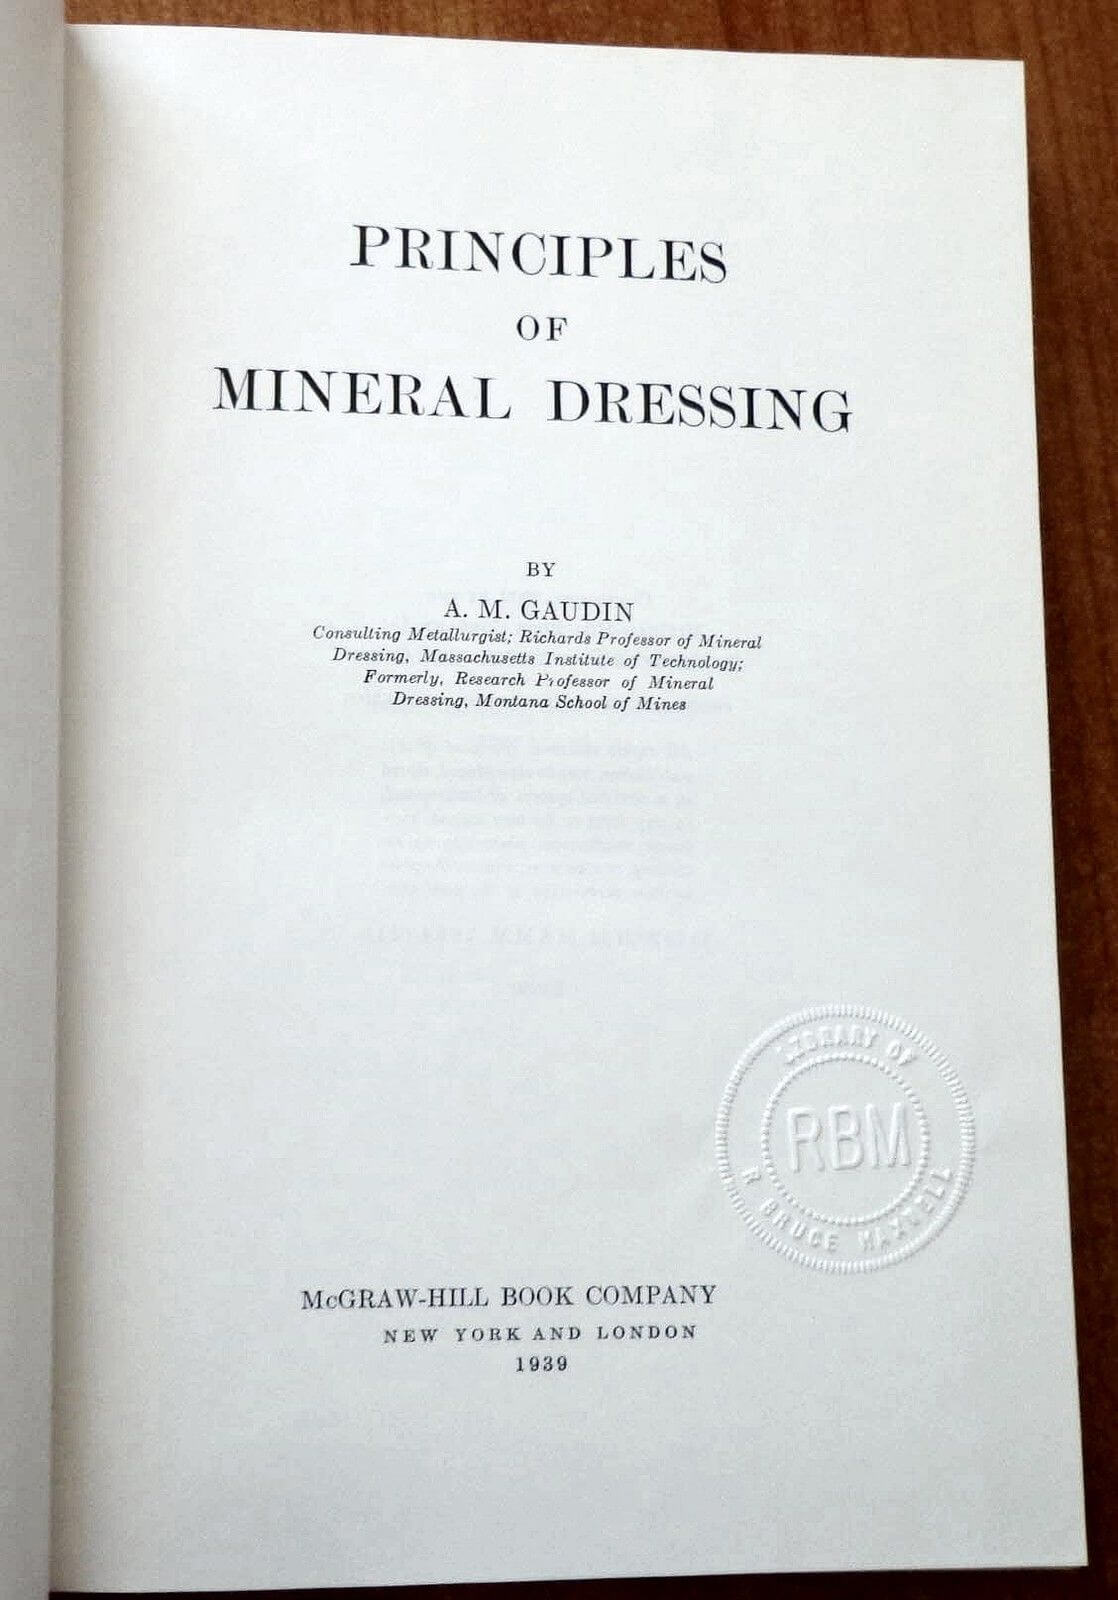 principles-of-mineral-dressing-by-a-m-gaudin-1939